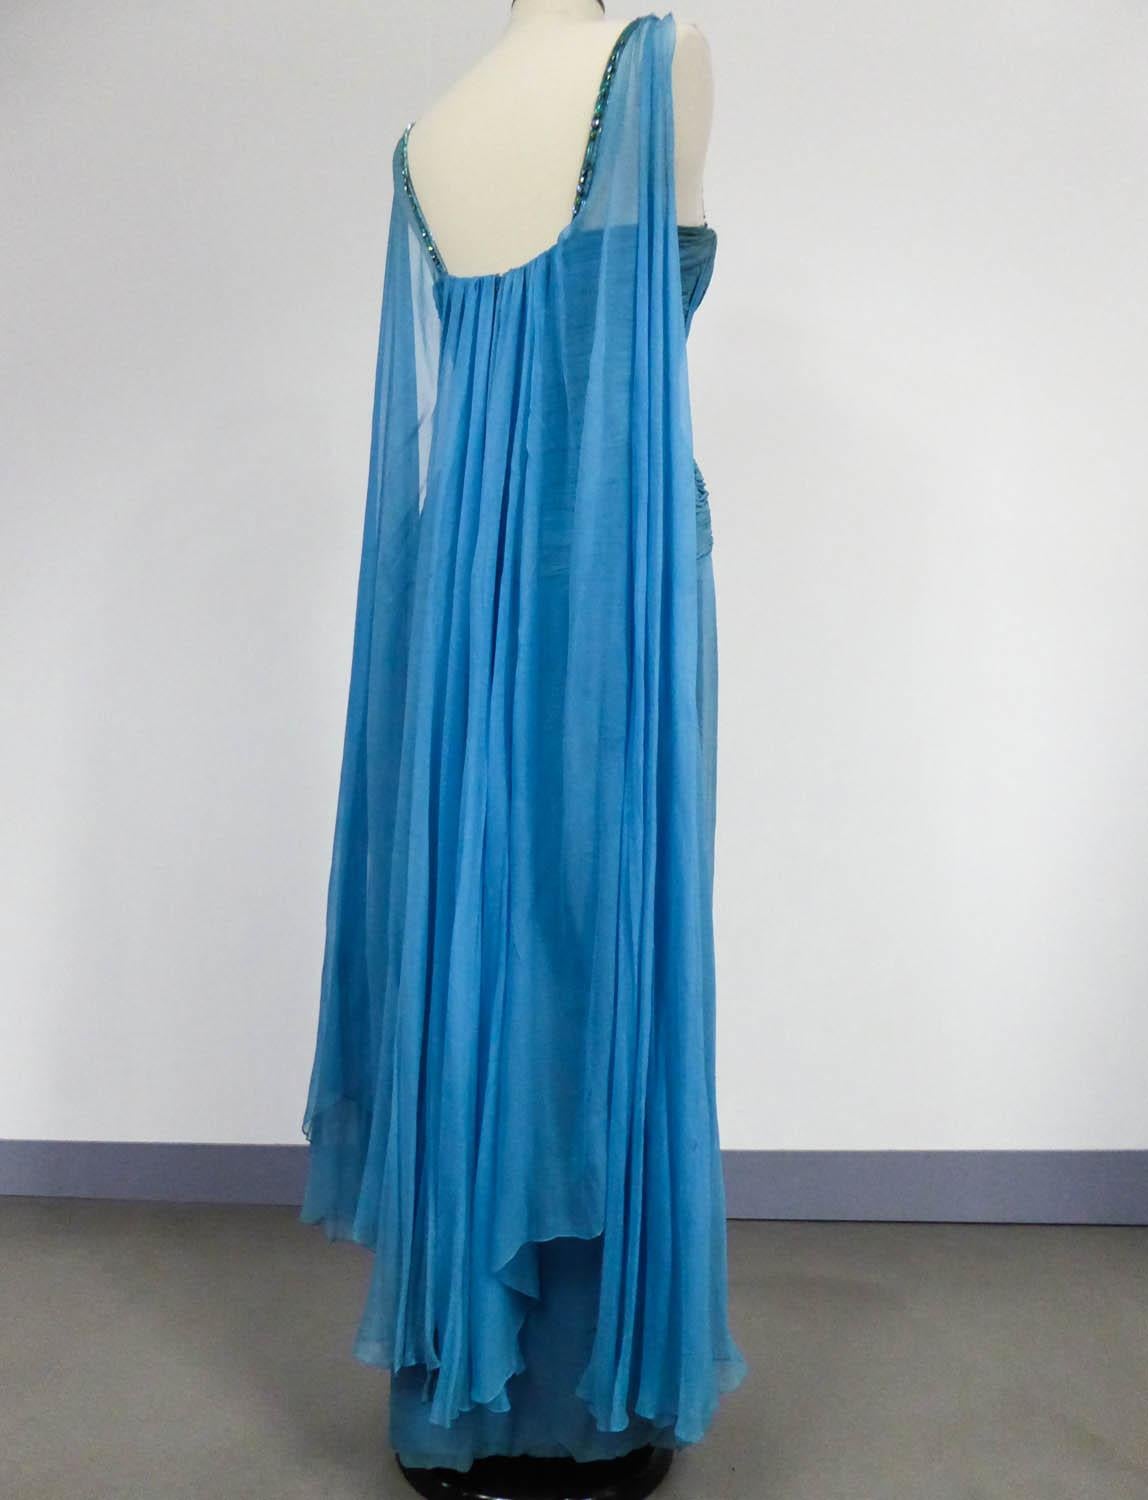 A French Carven Couture Chiffon Evening Dress numbered 11150 Circa 1960/1970 For Sale 5